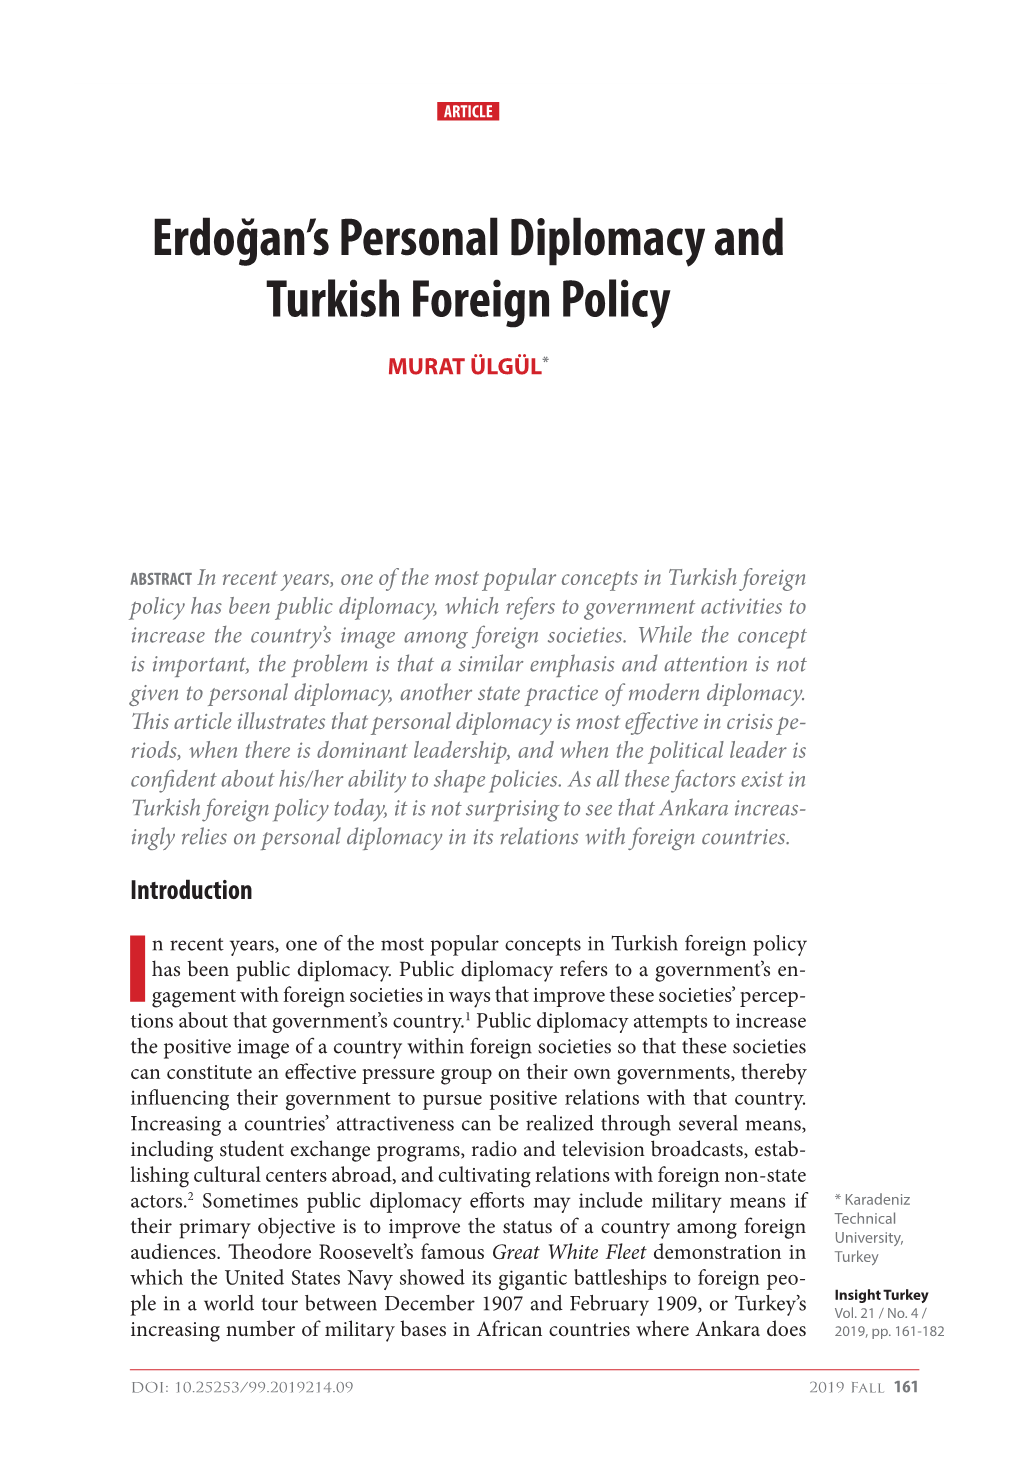 Erdoğan's Personal Diplomacy and Turkish Foreign Policy